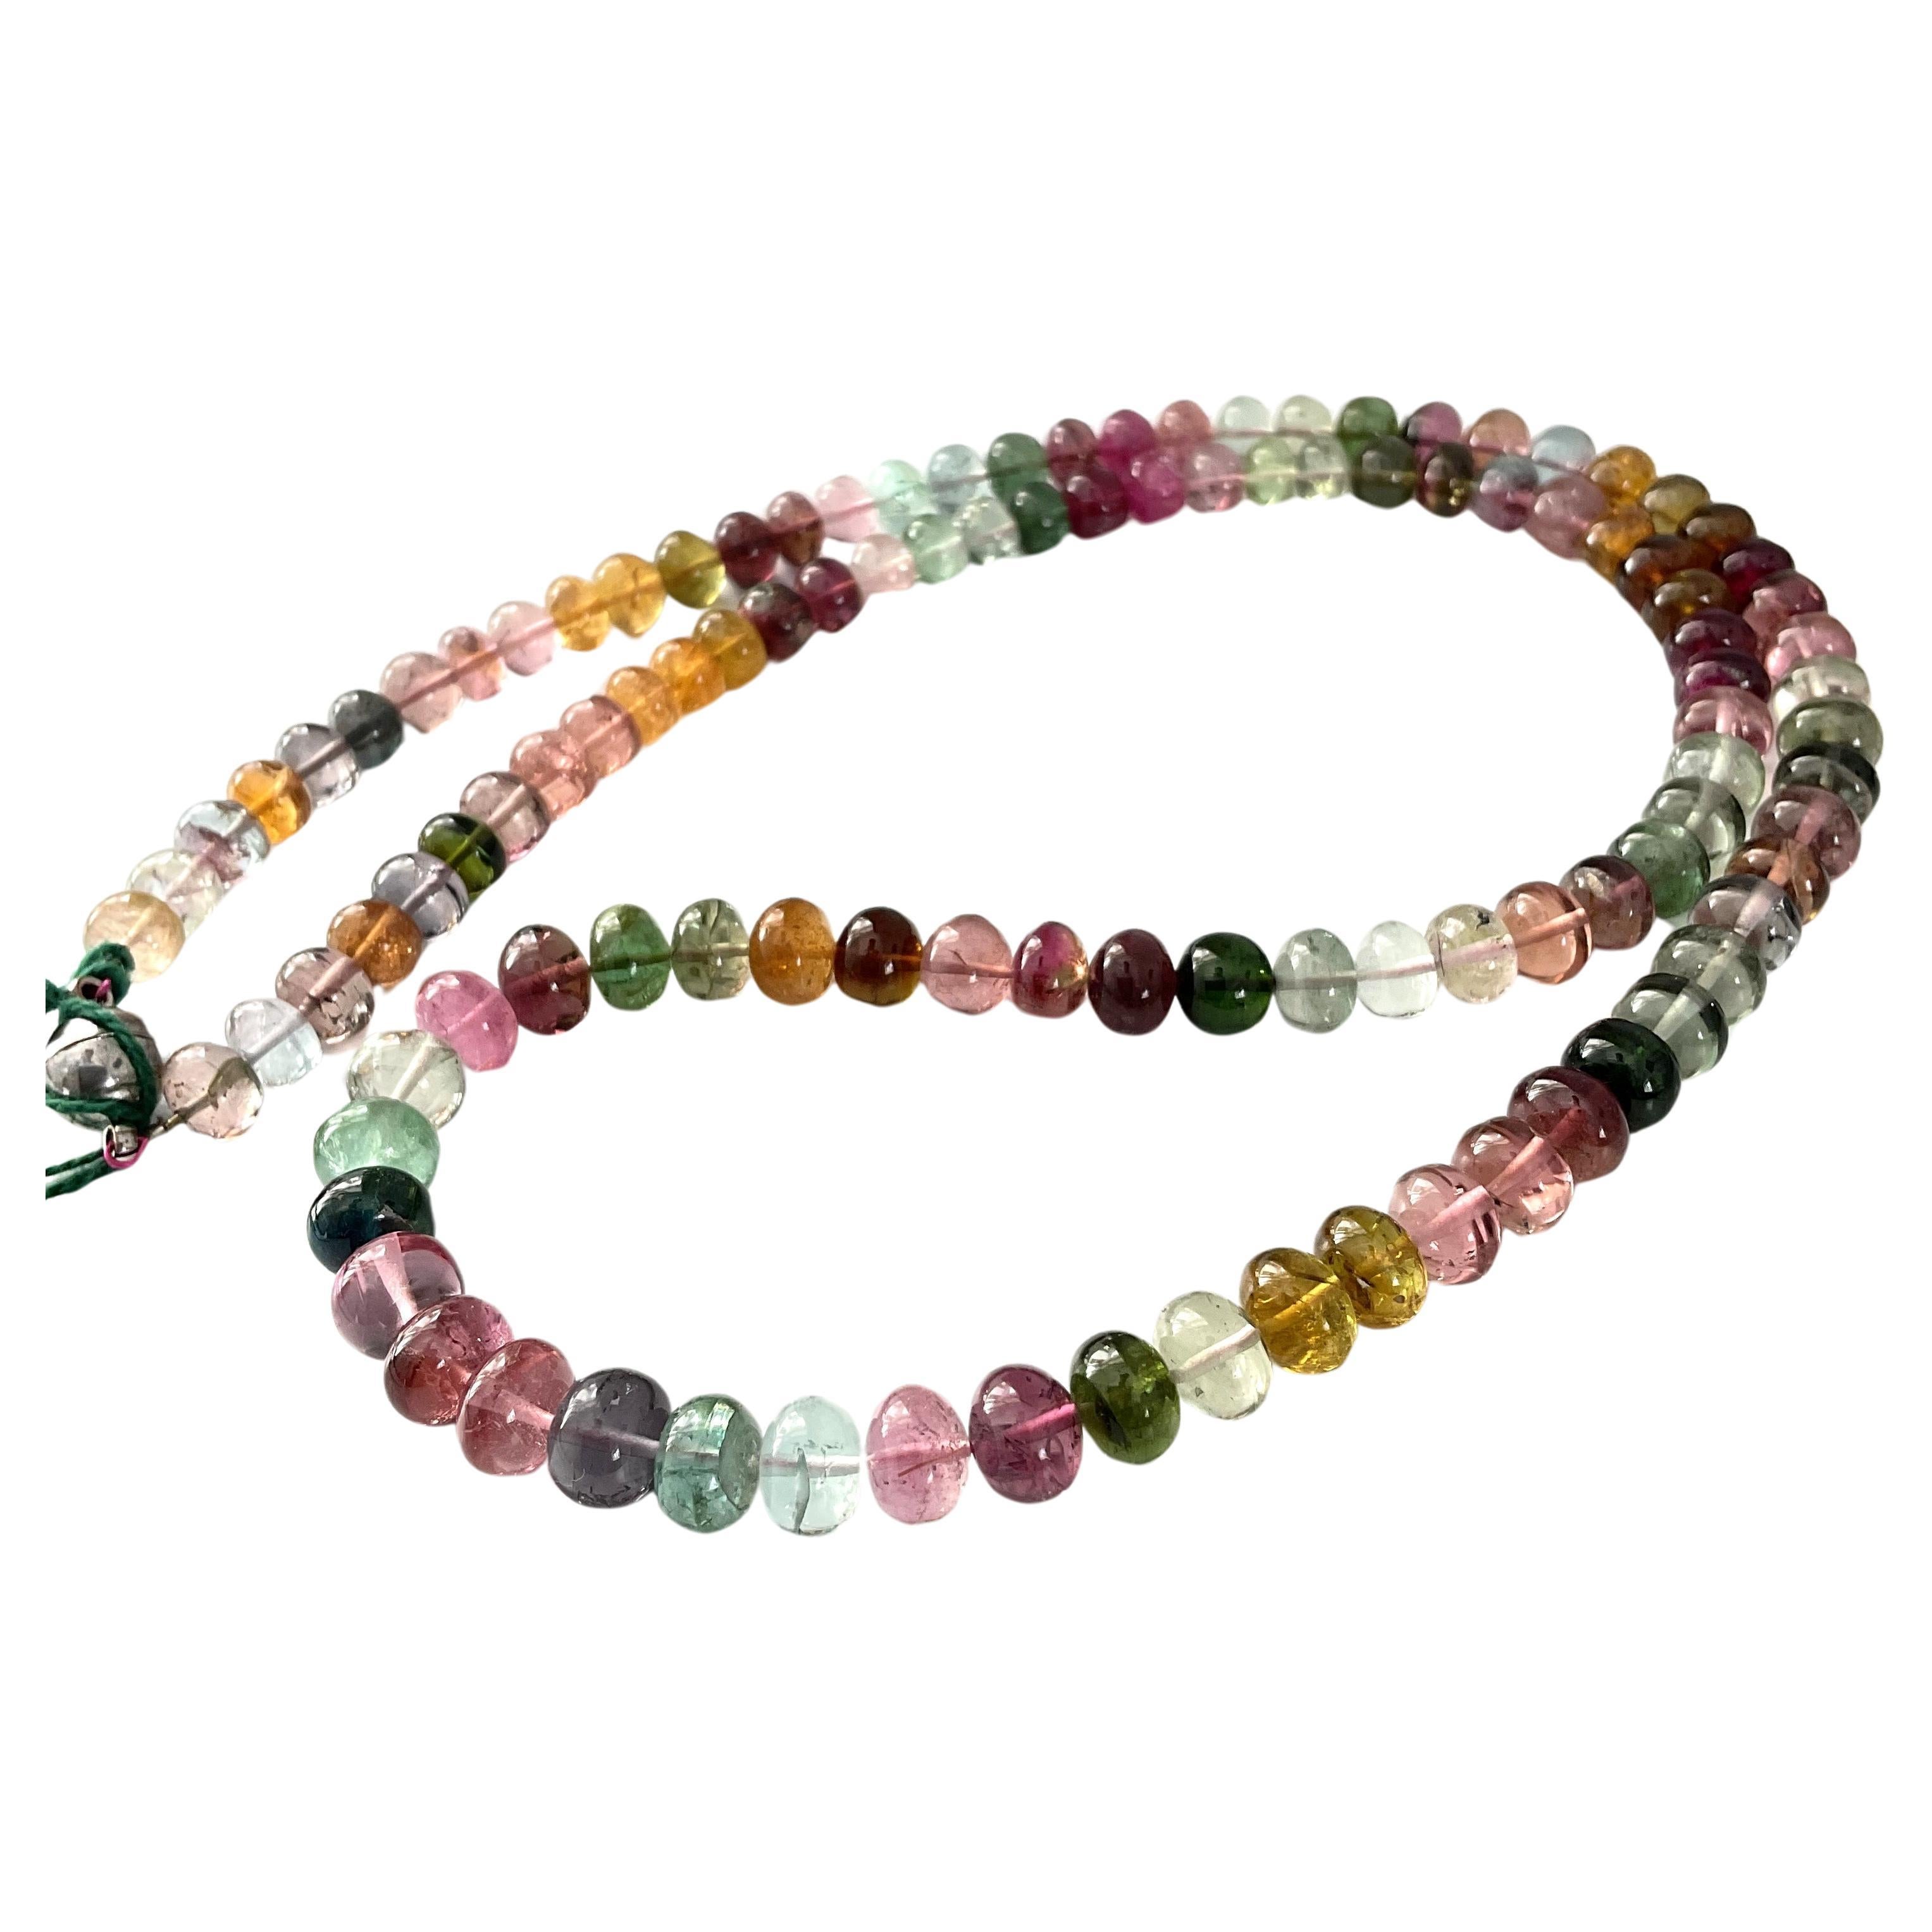 265.70 Carats Multi Tourmaline Beaded Necklace For Fine Jewelry Natural Gemstone For Sale